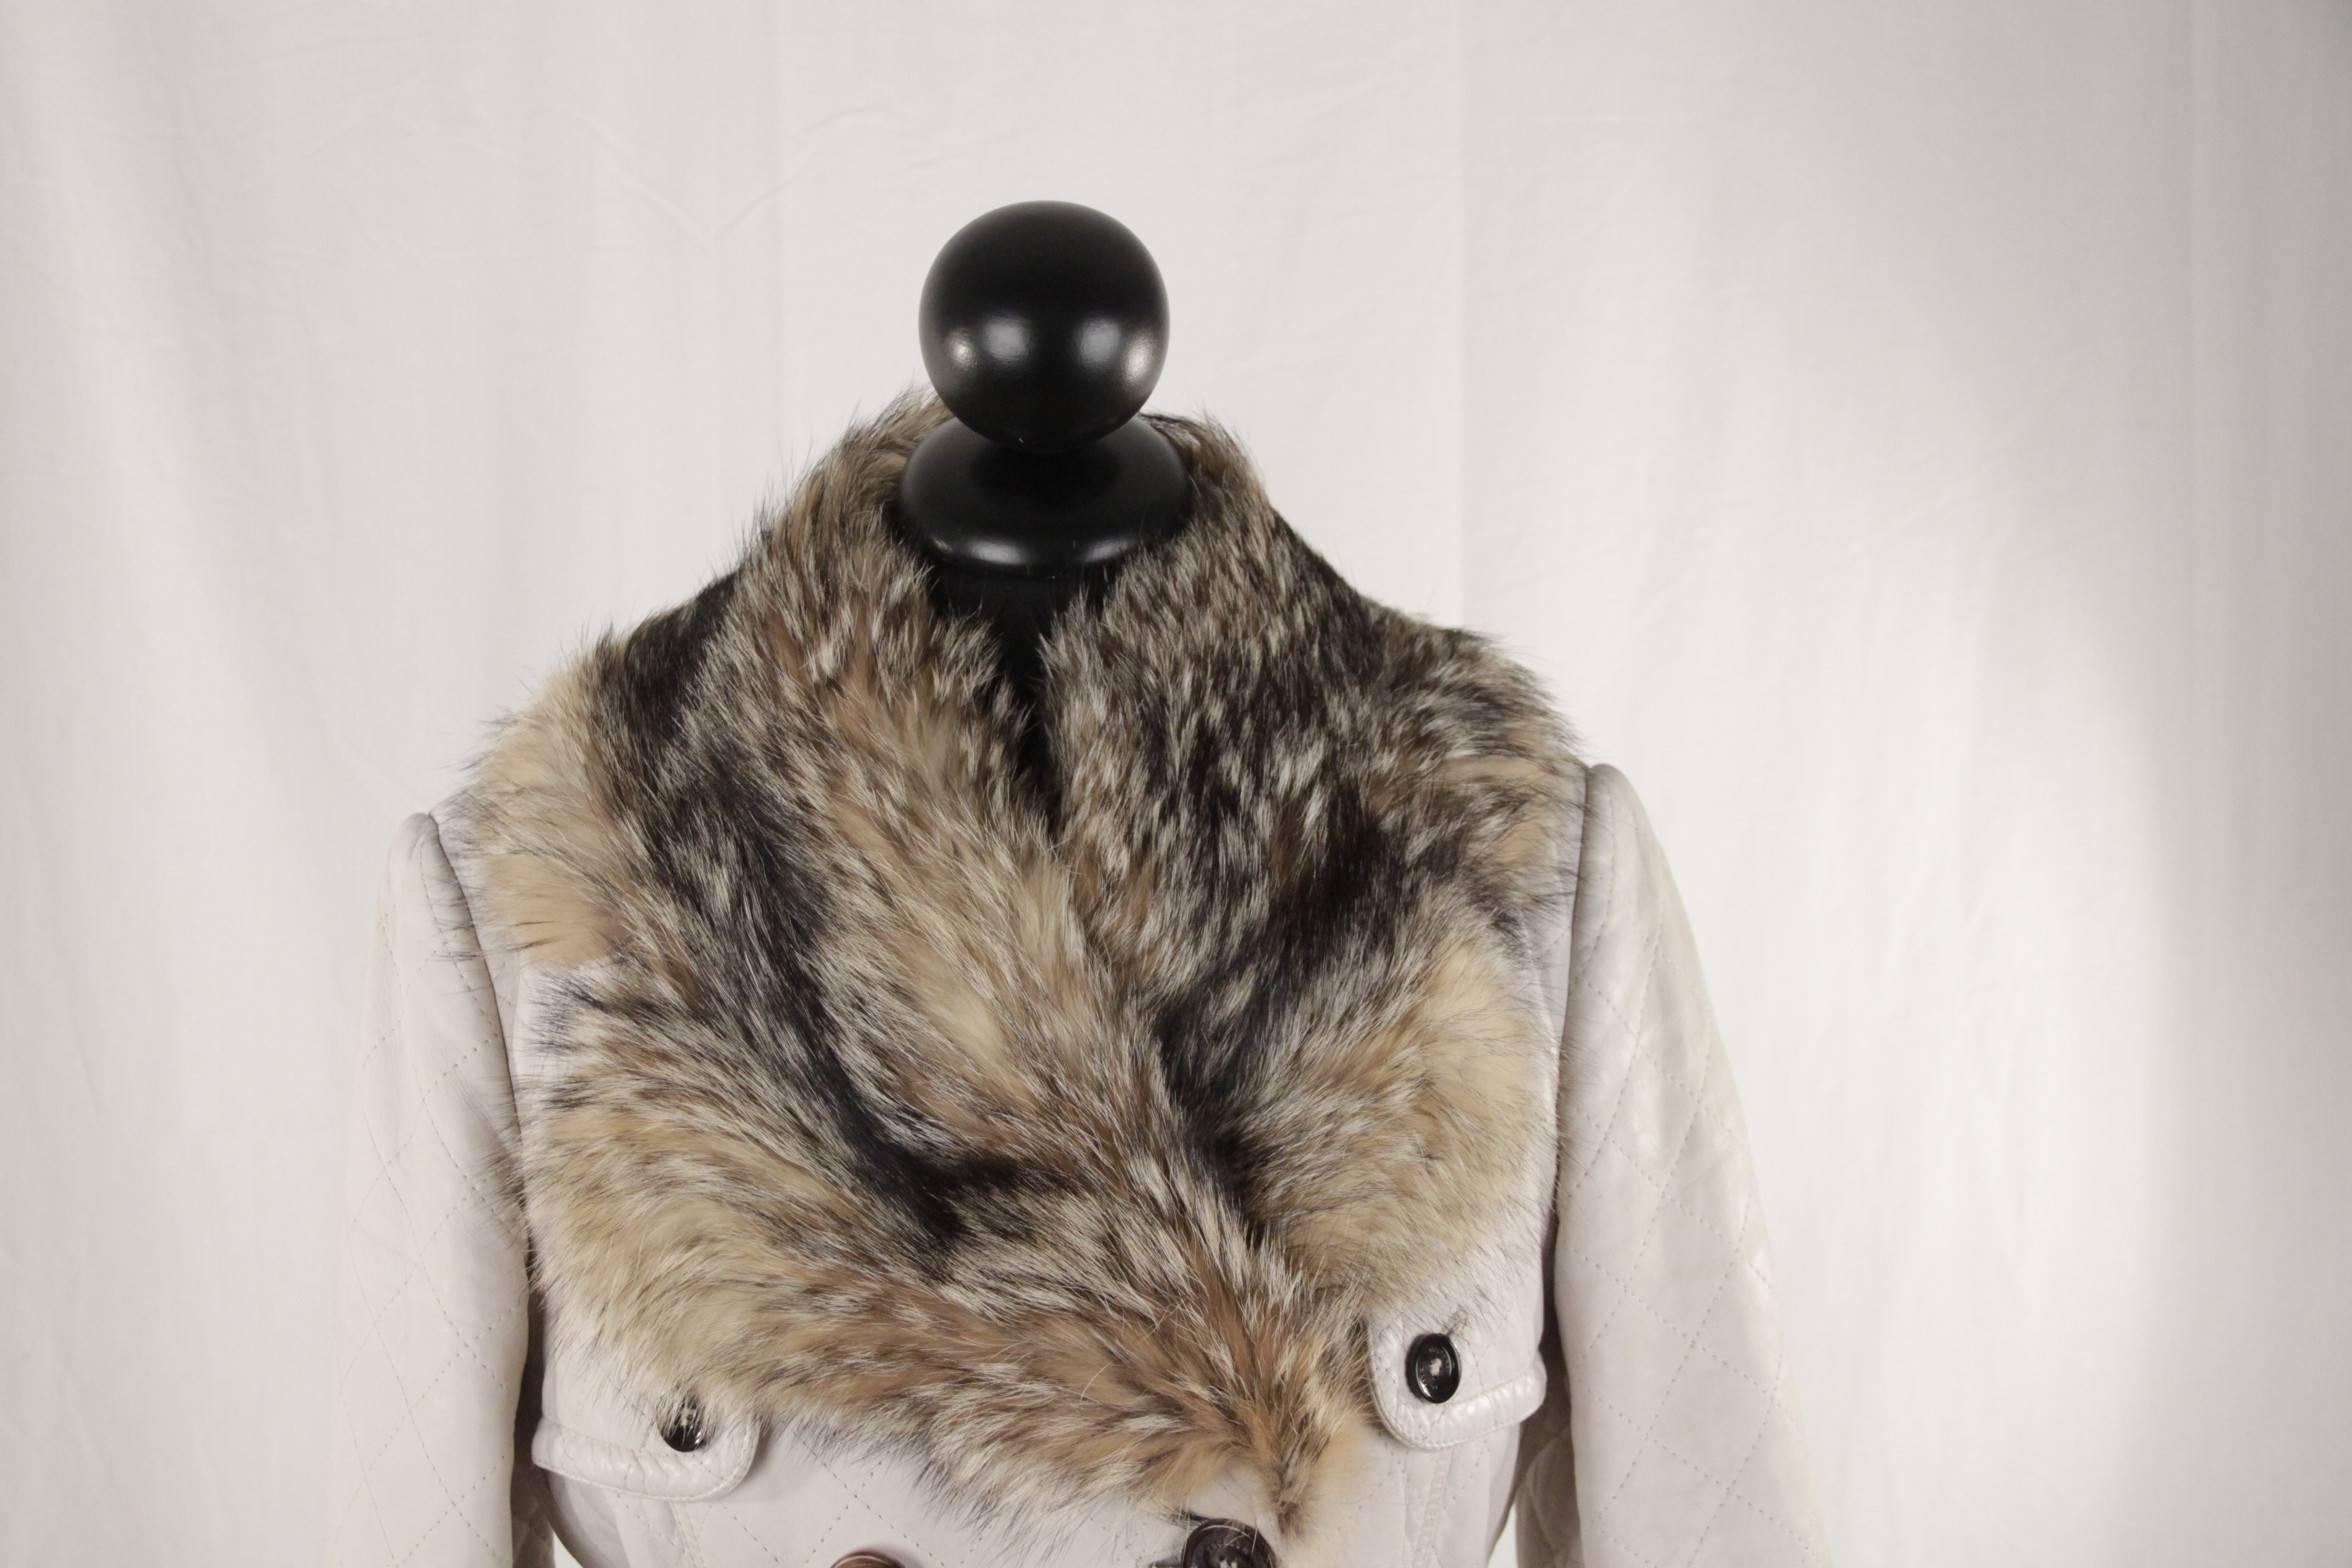  - Color: Off-White
- 100% lambskin leather
- Double-breasted design
- Button closure
- Belted waistline
- Gun flap
- Dual side flap pockets
- Fox fur trim on collar, hem & cuffs
- Fully lined with Polyester fabric
- Size: 42 IT (The size